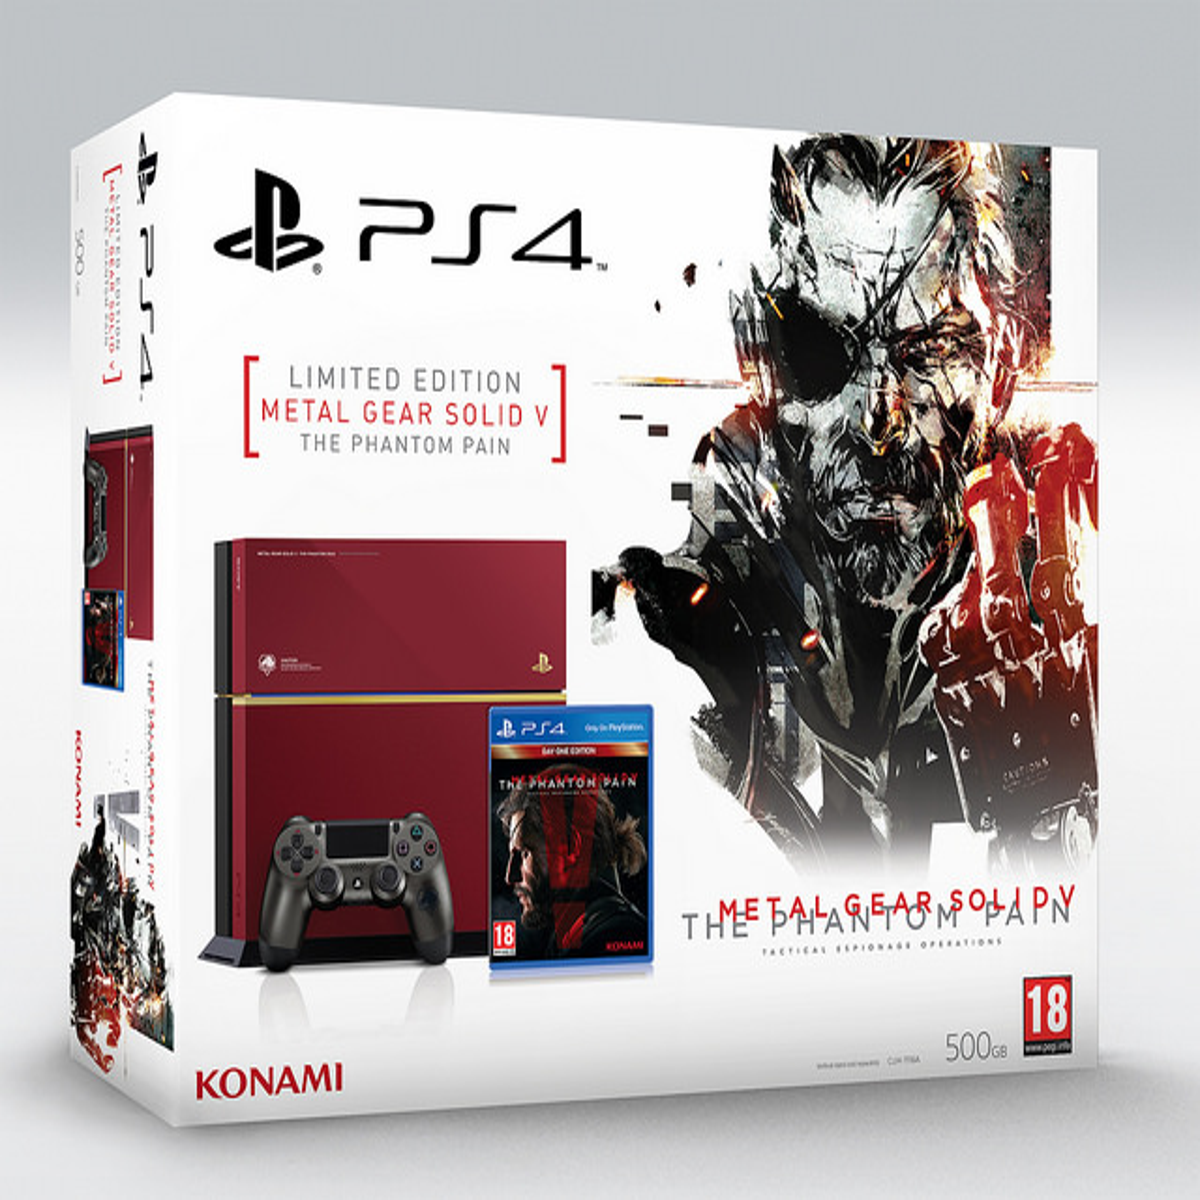 MGS5: The Phantom Pain PS4 console available in Europe on September 1